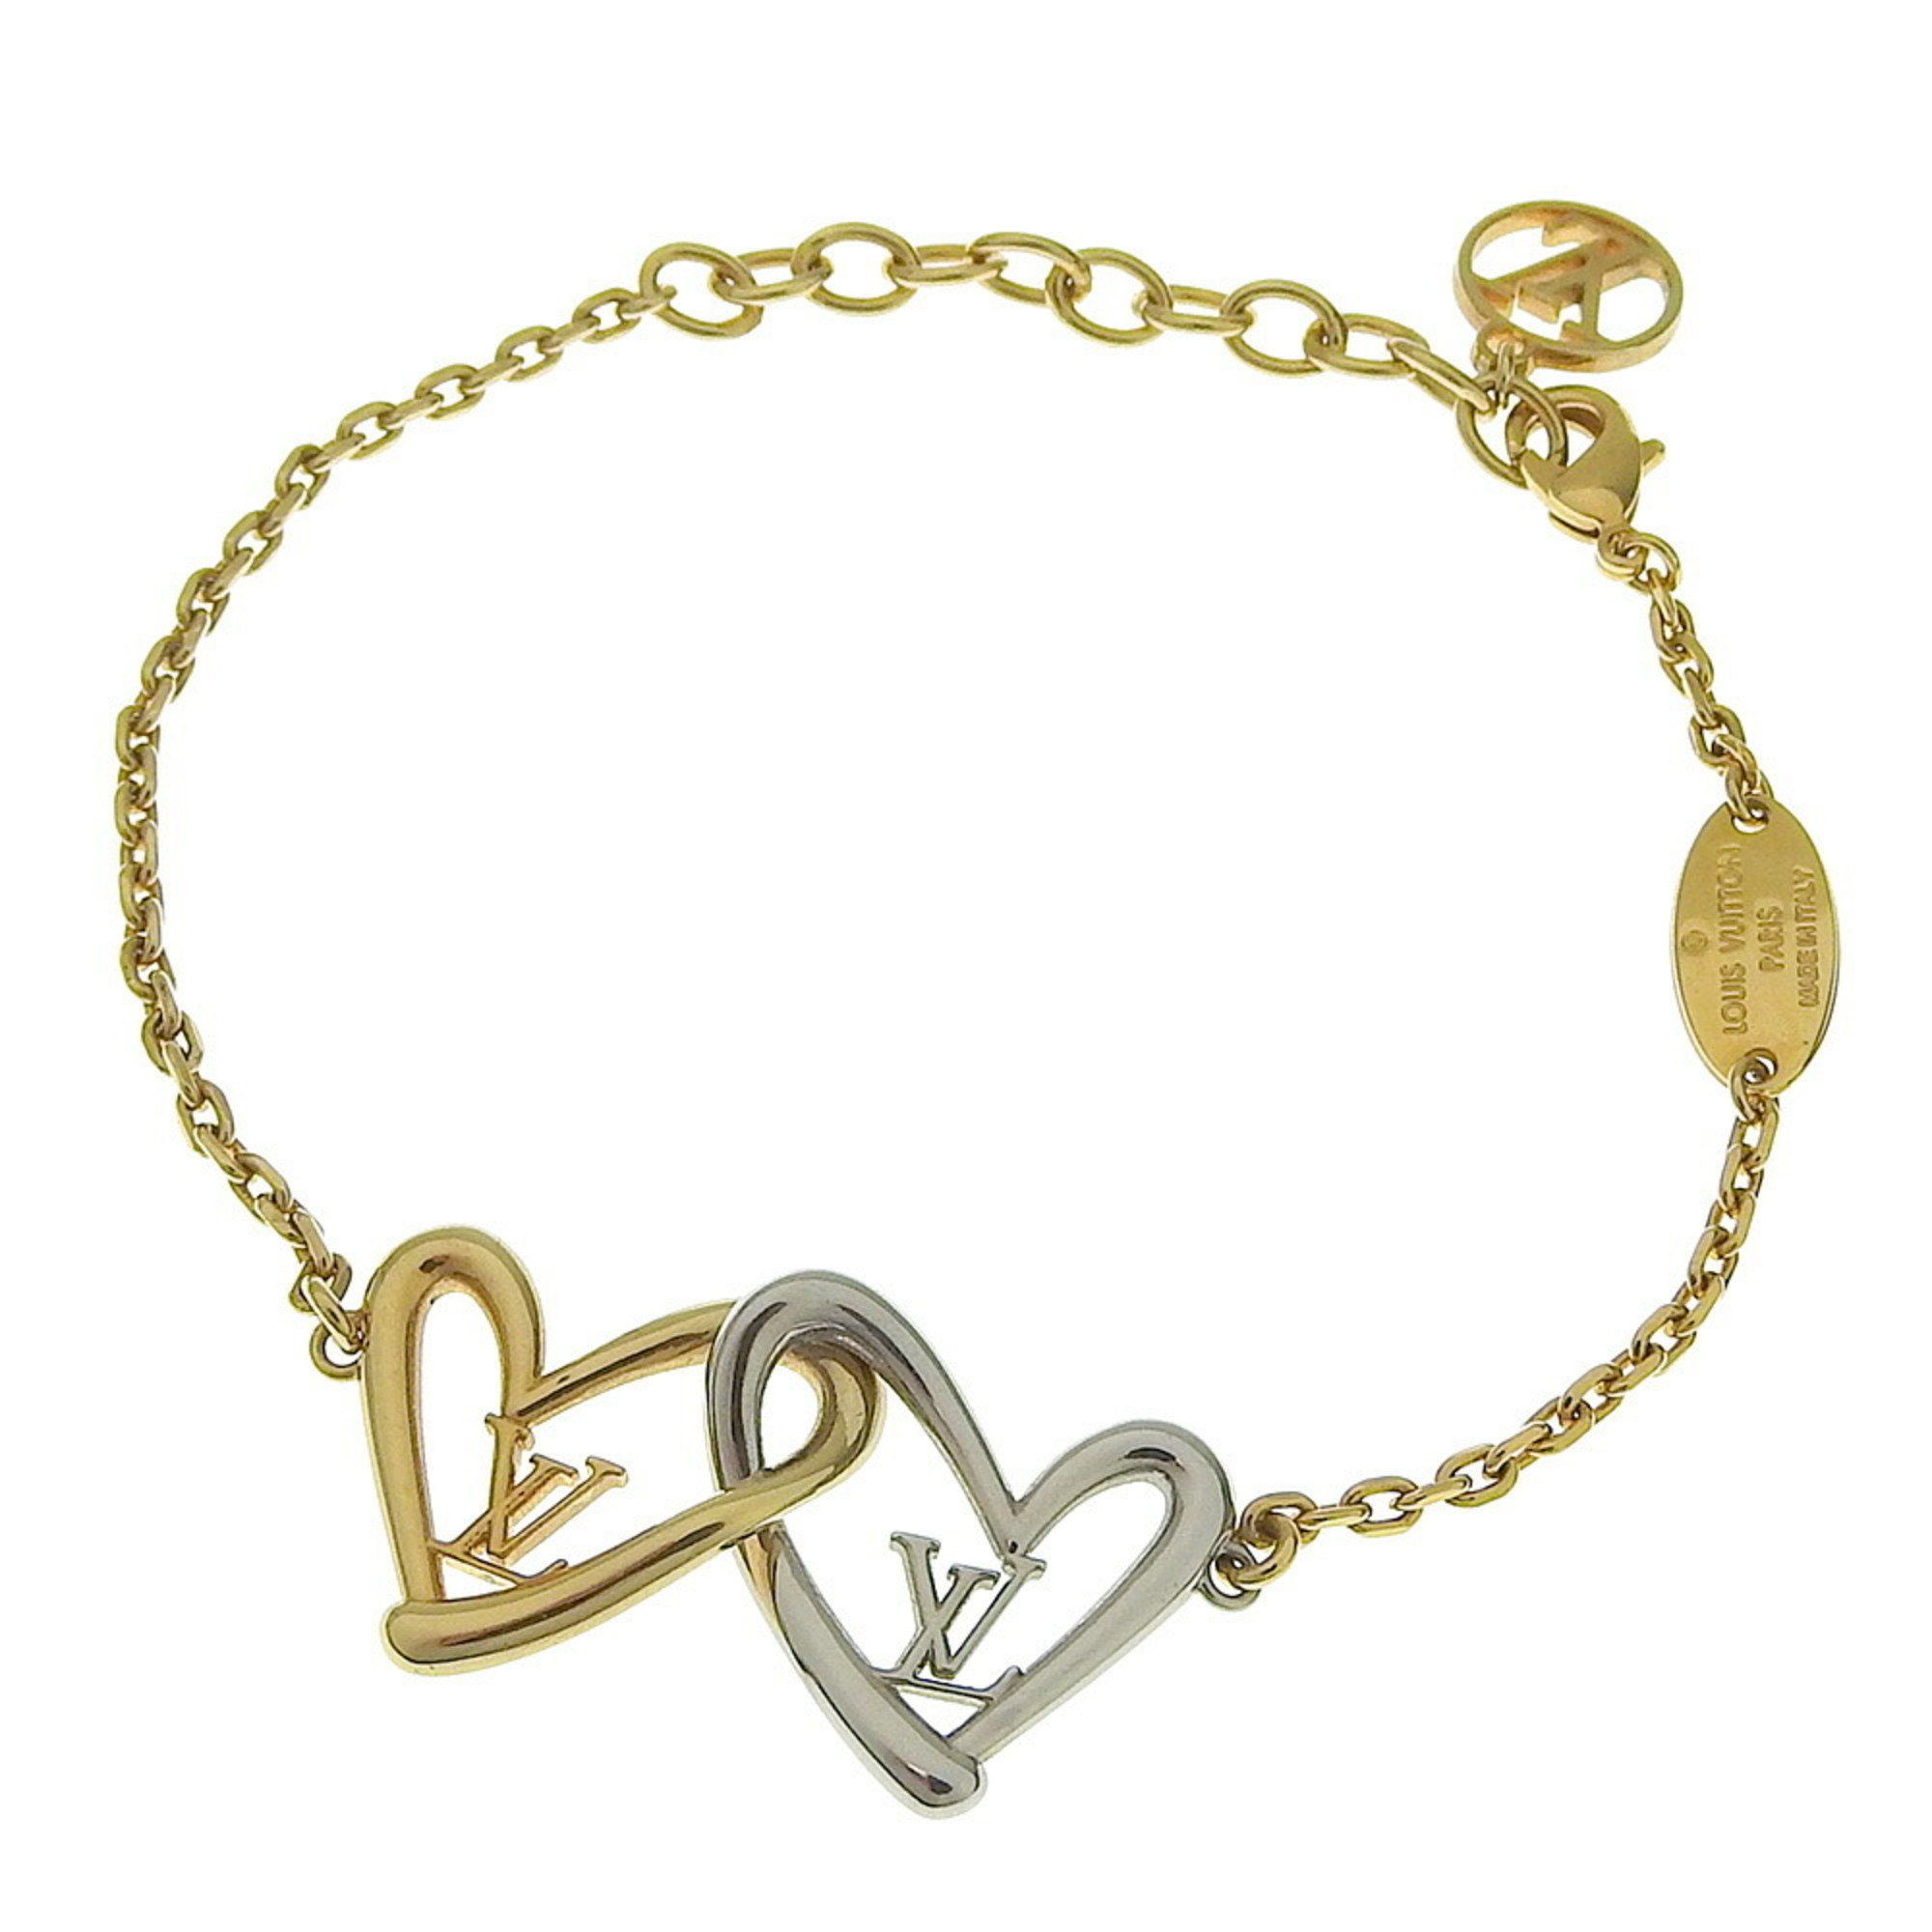 Louis Vuitton - Authenticated Fall in Love Bracelet - Gold Plated Gold for Women, Very Good Condition